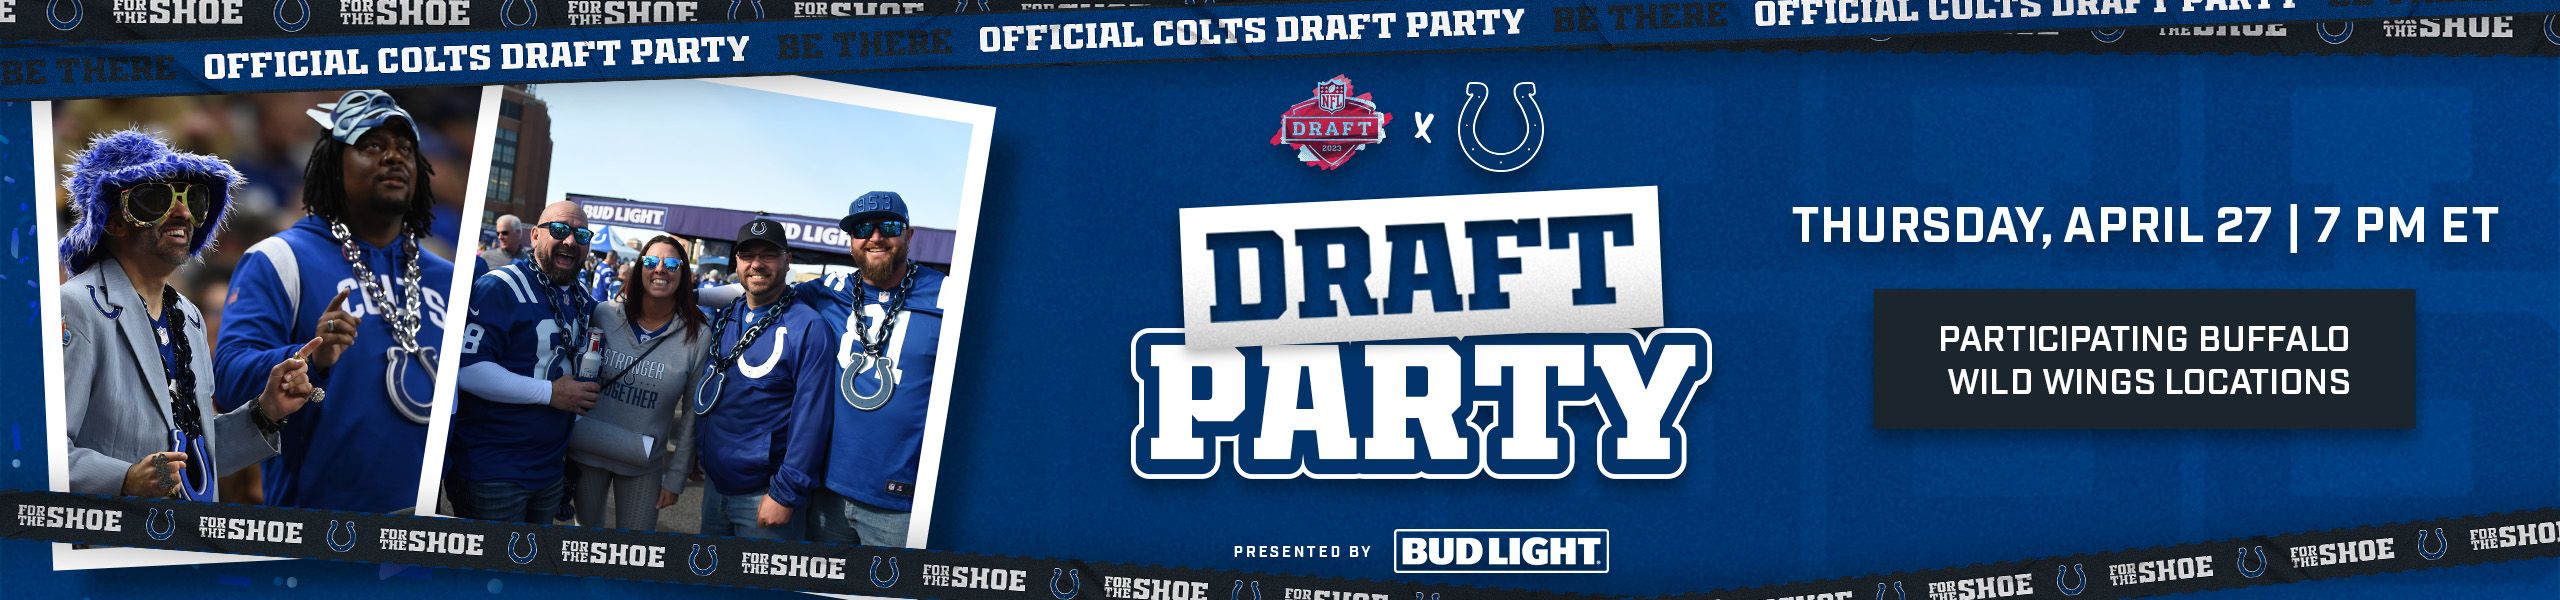 Colts Draft Party  Indianapolis Colts 